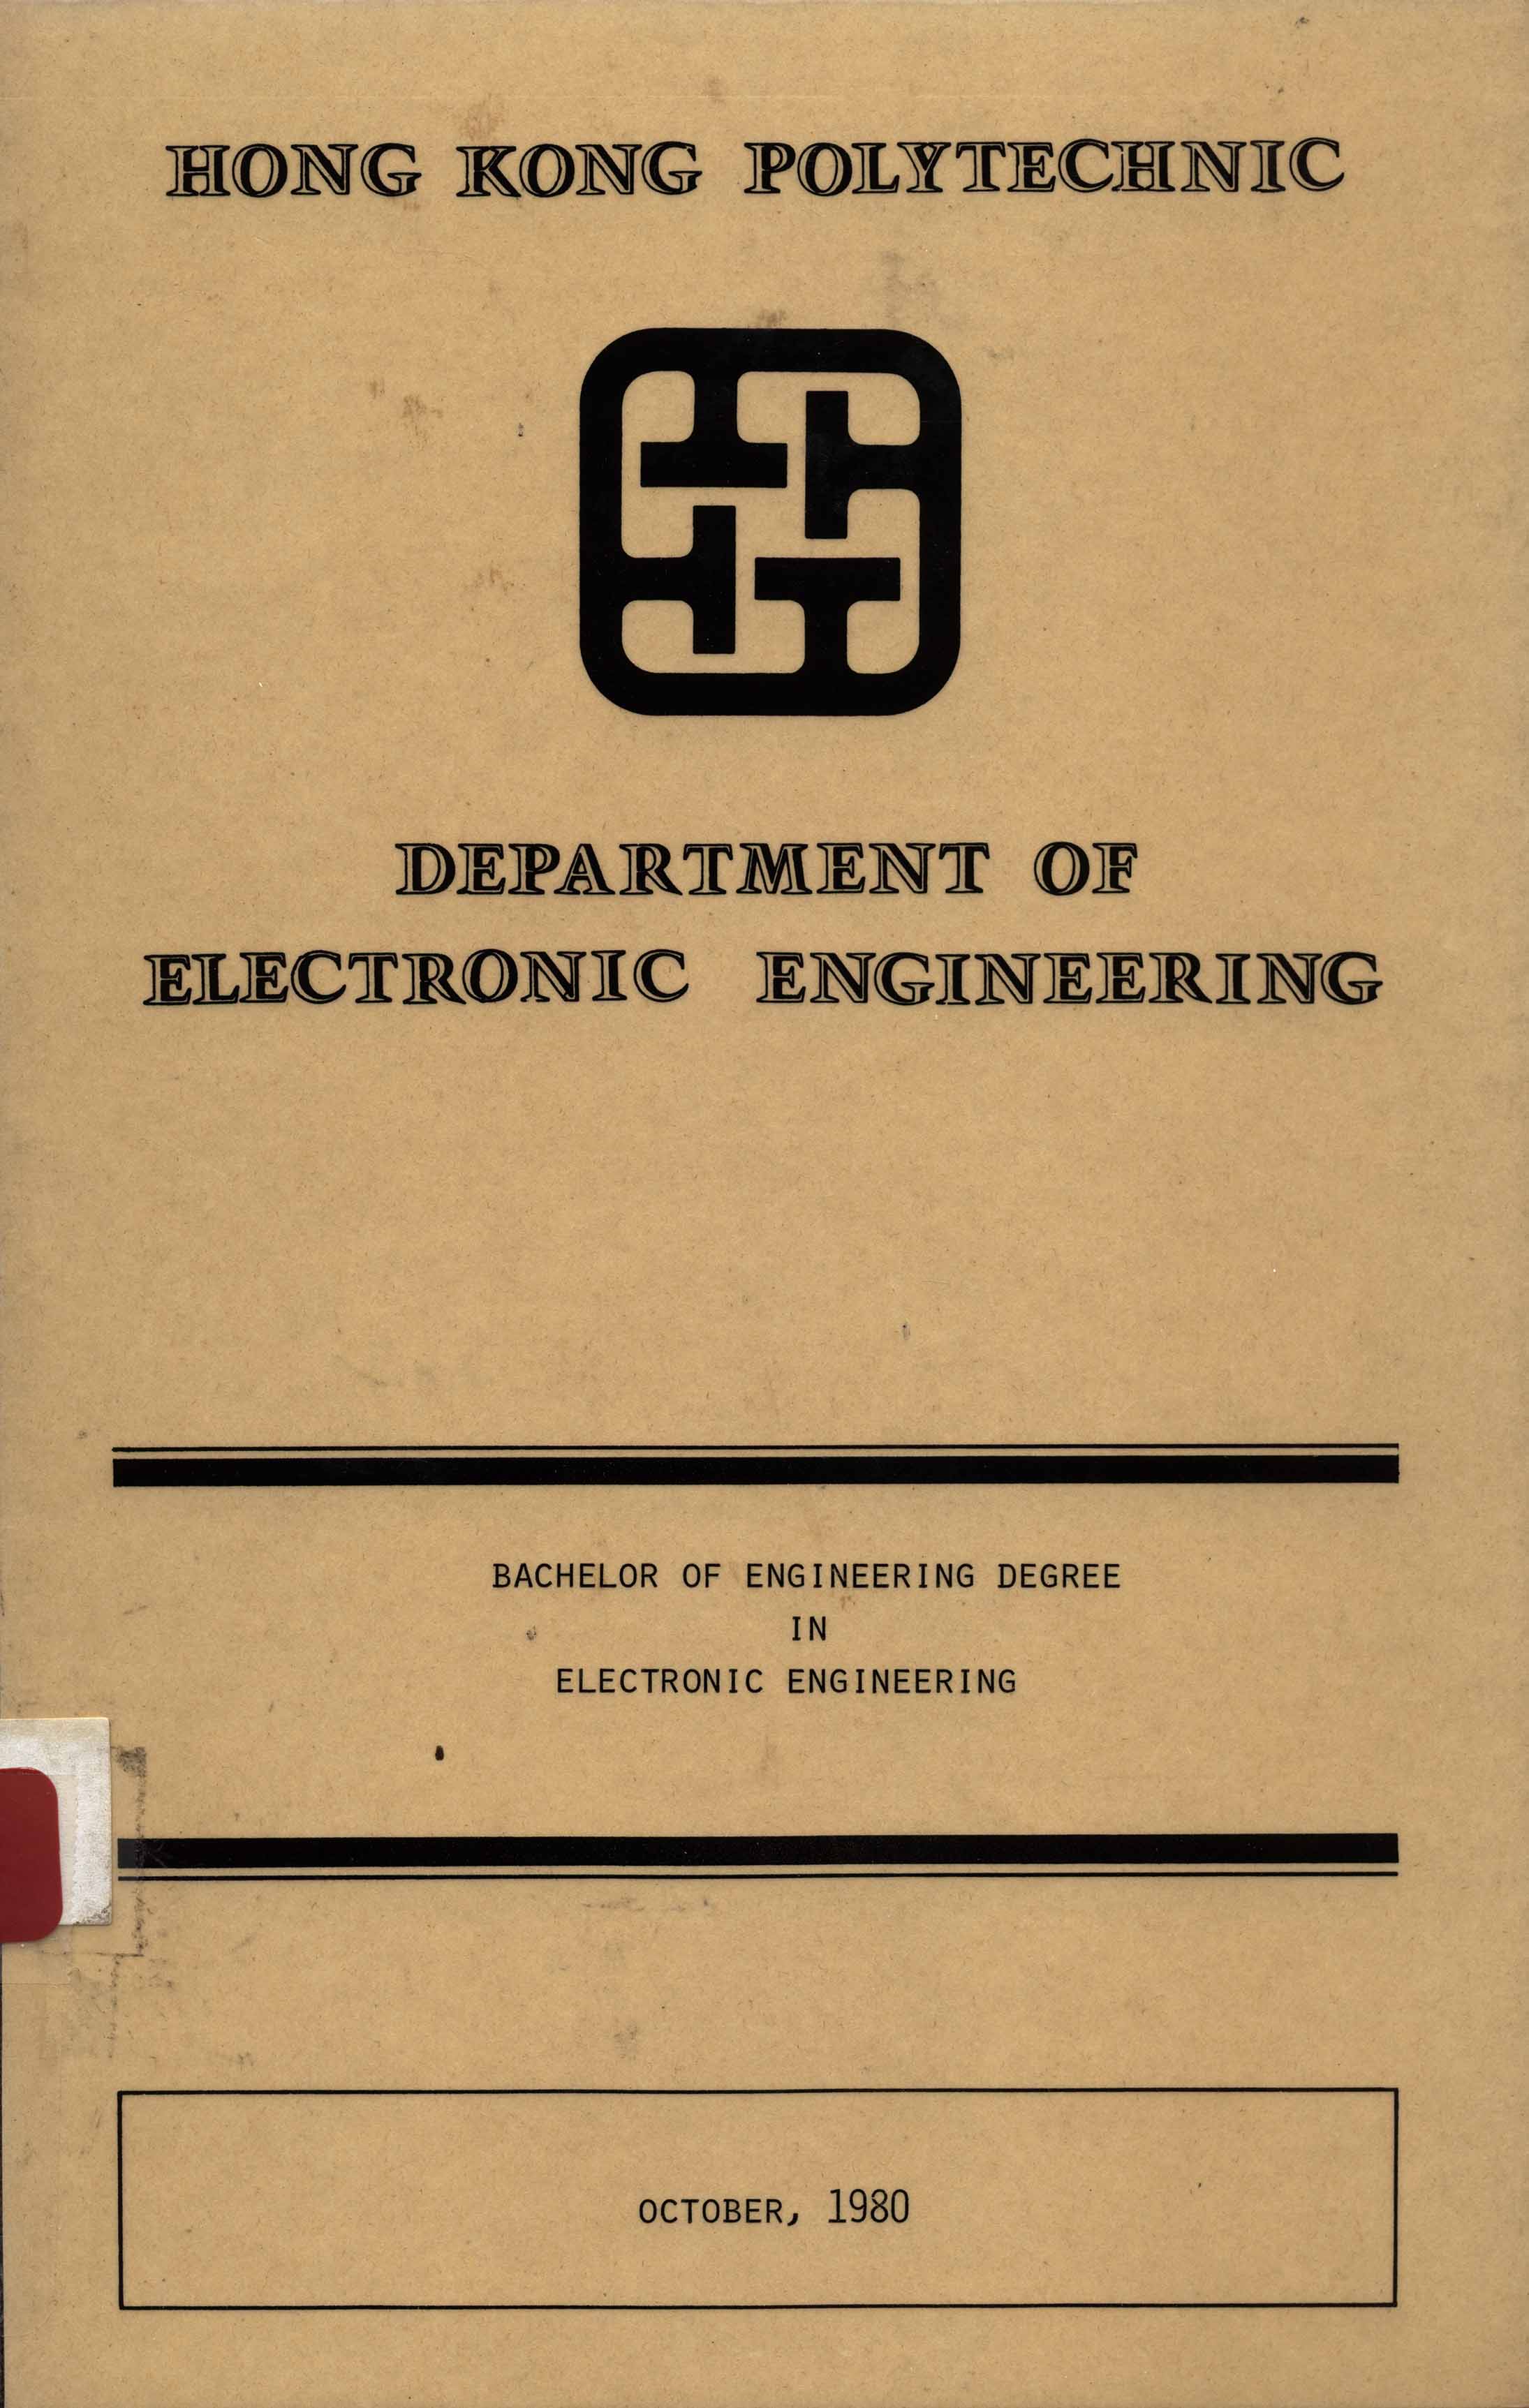 Bachelor of Engineering degree in Electronic Engineering